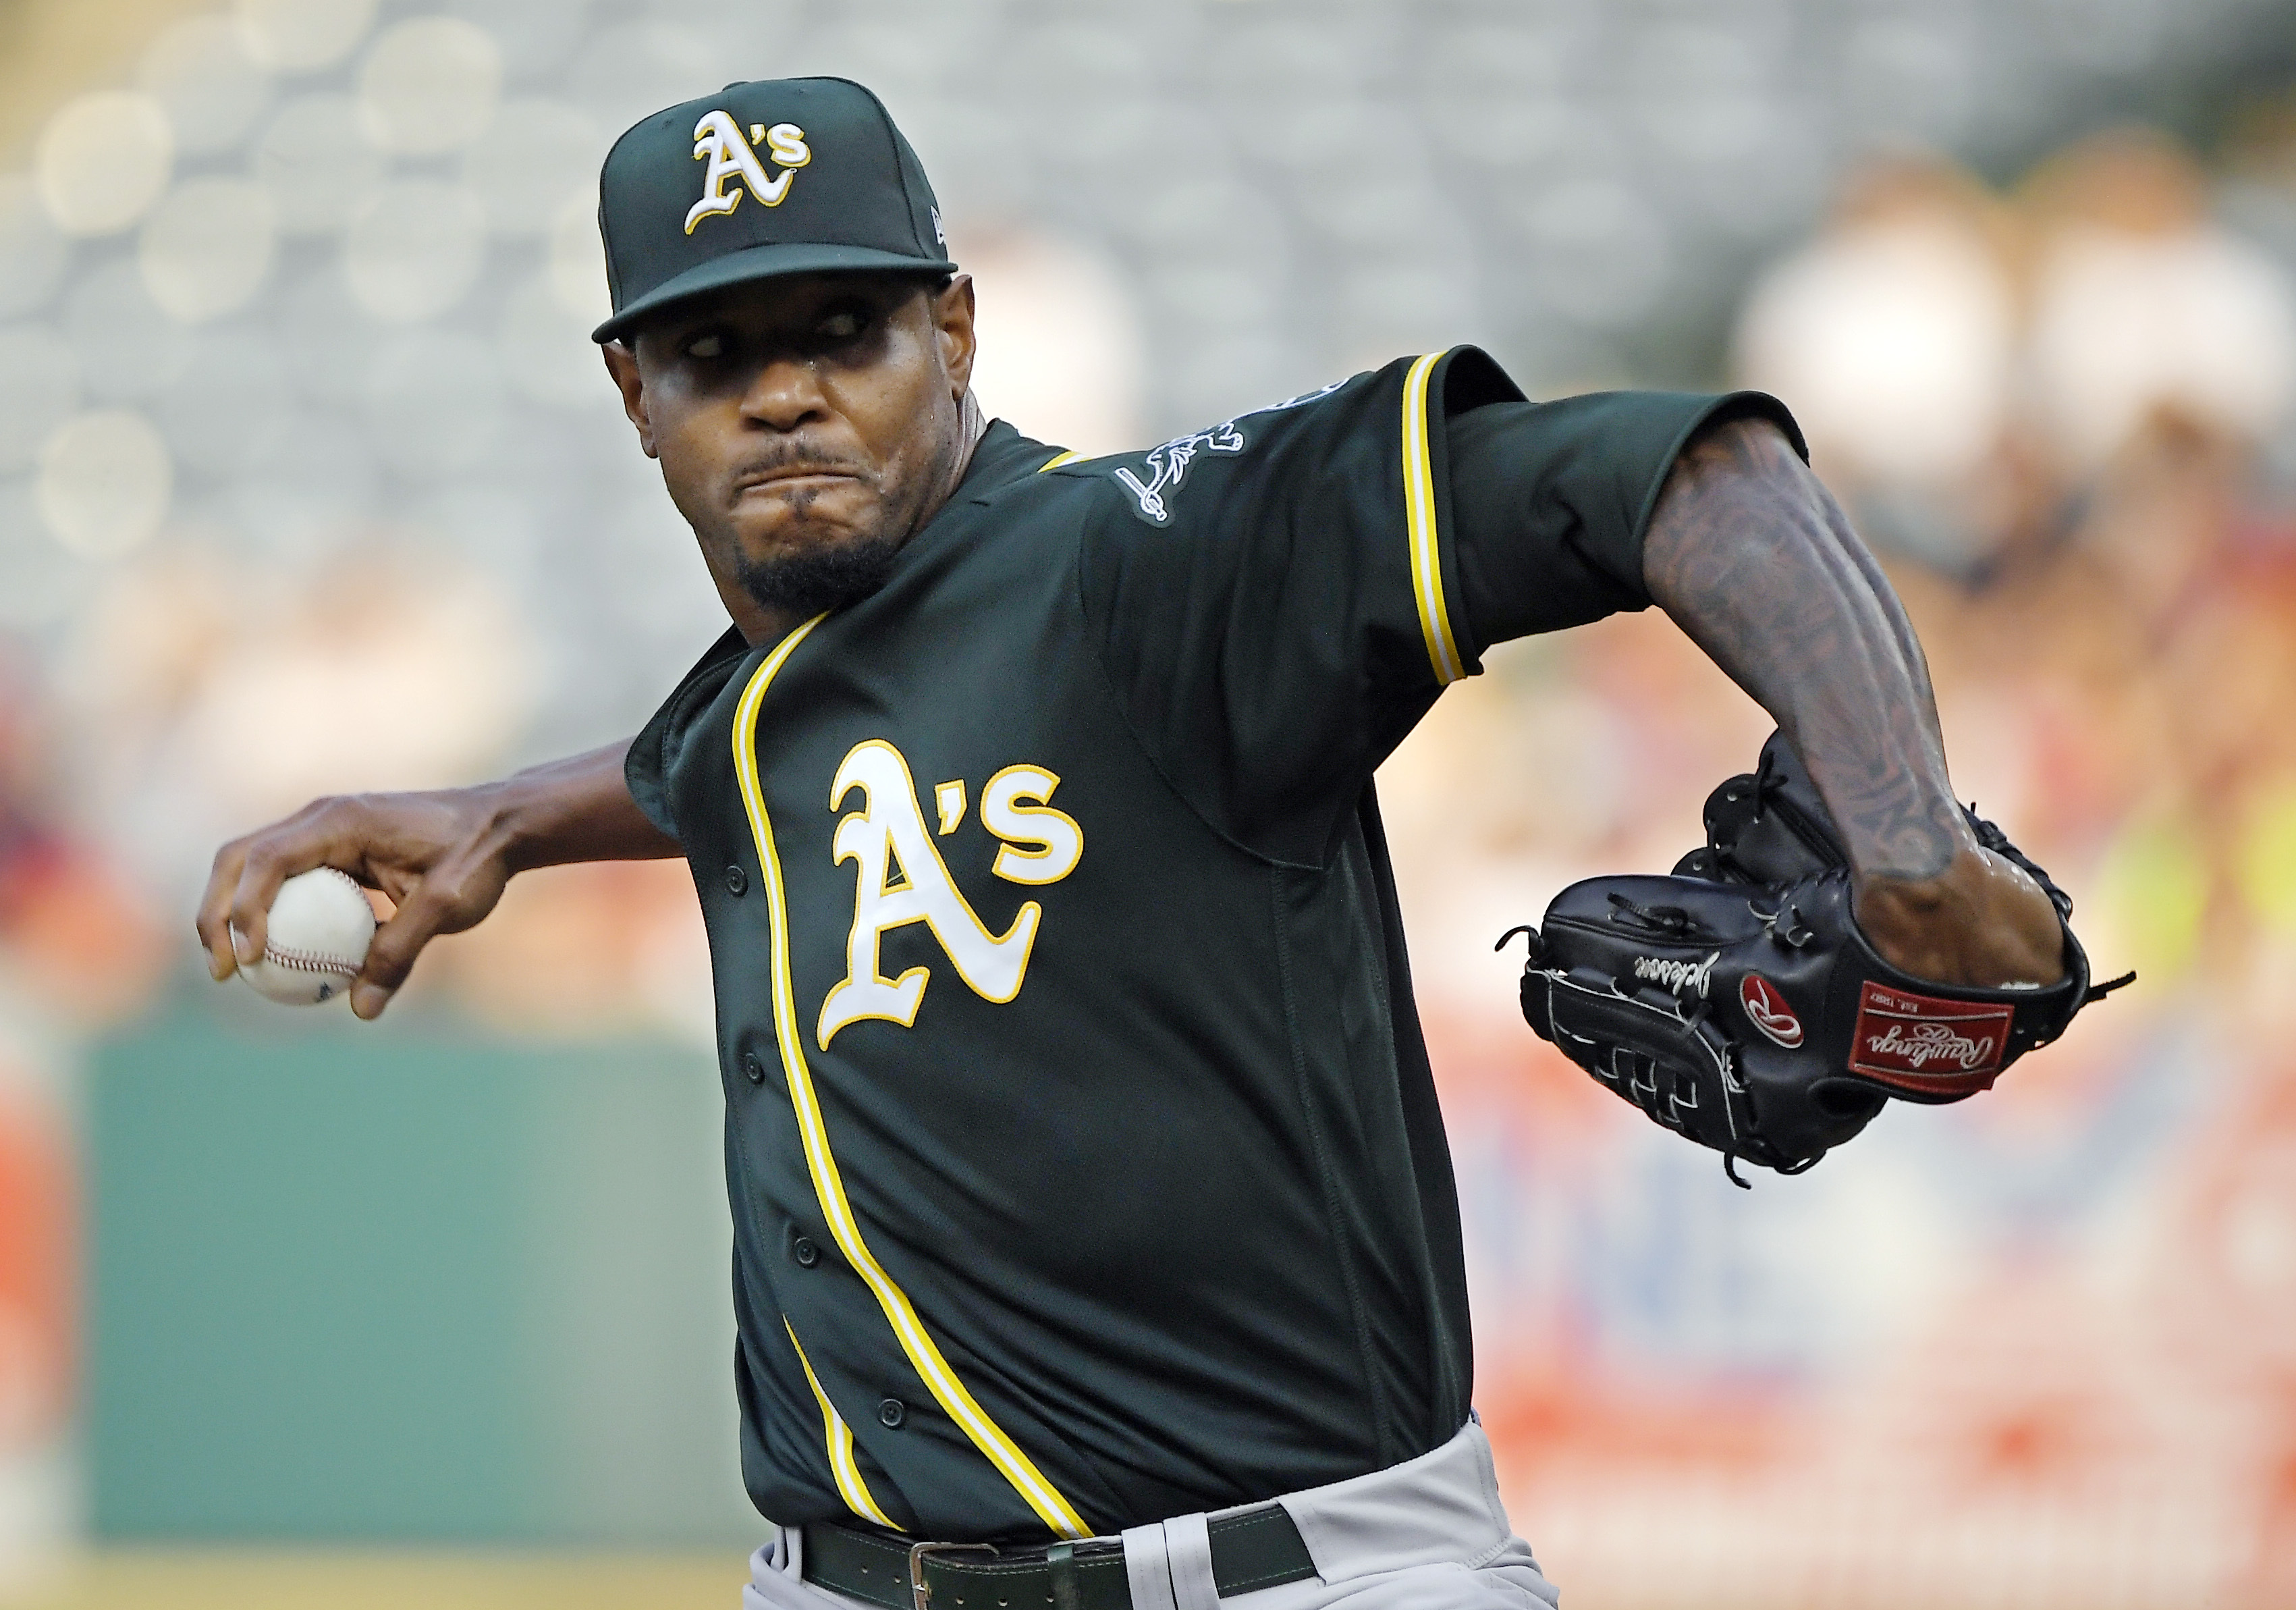 Jays acquire RHP Edwin Jackson, who joins record 14th team